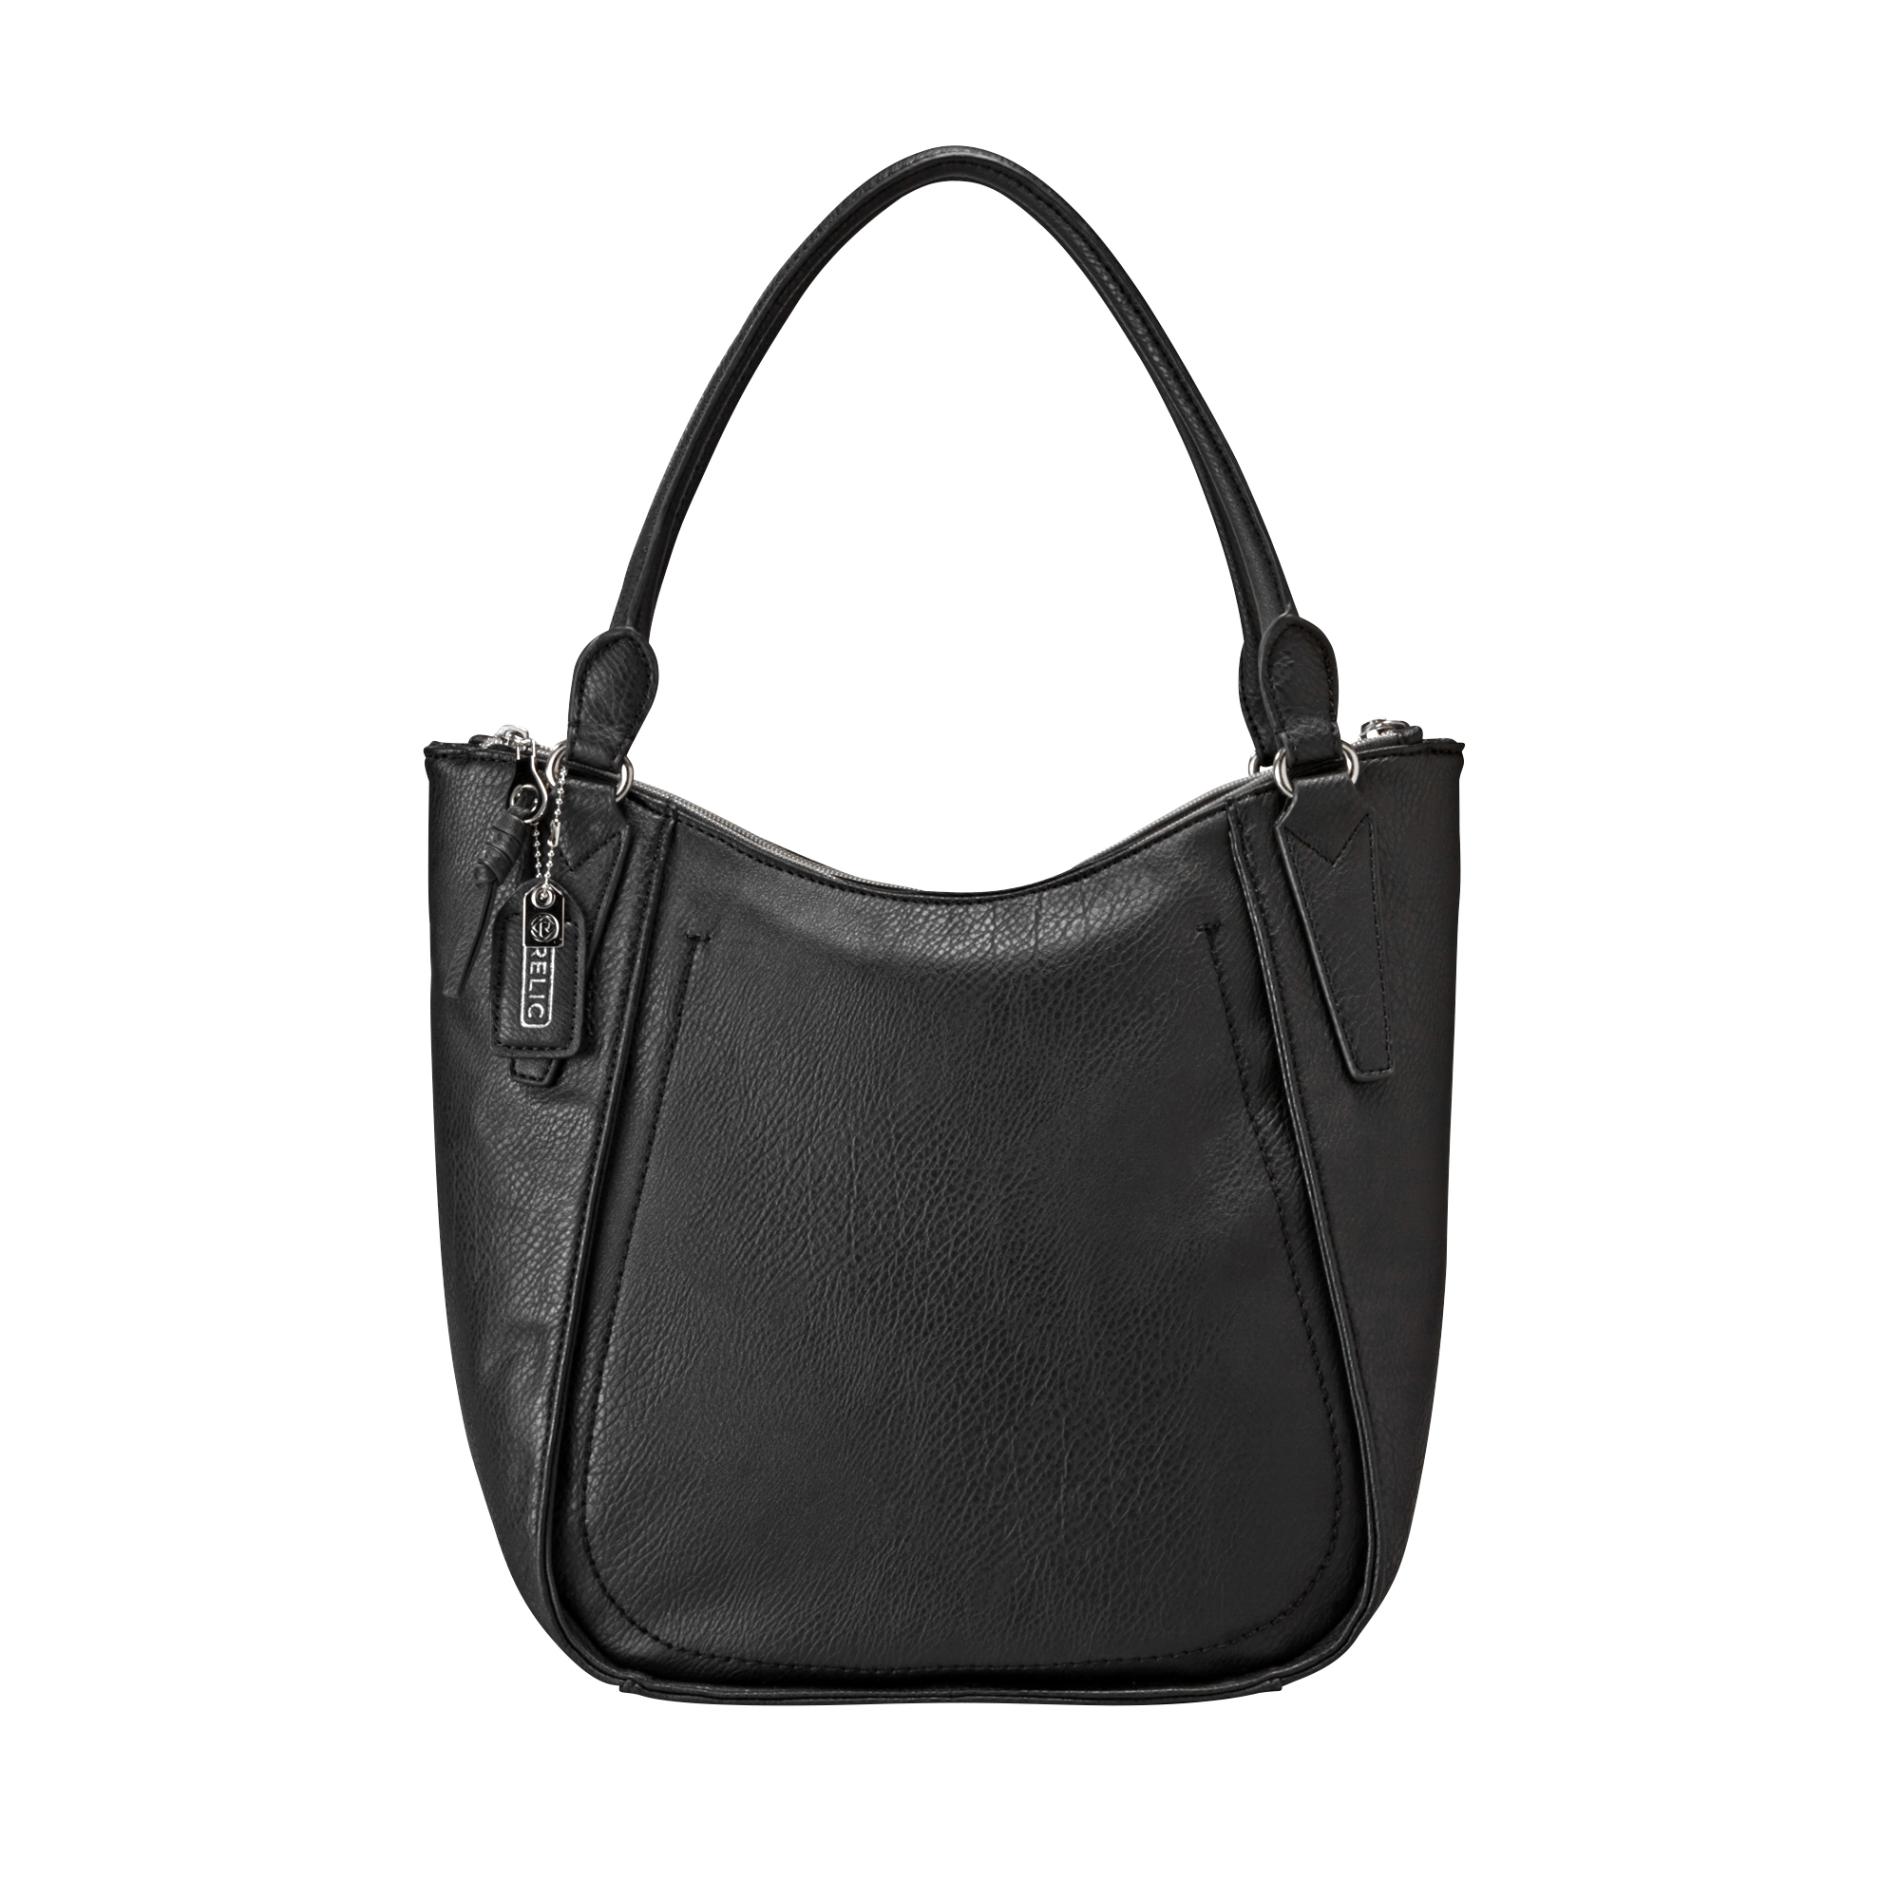 Relic Women's Cora Faux Leather Tote Bag